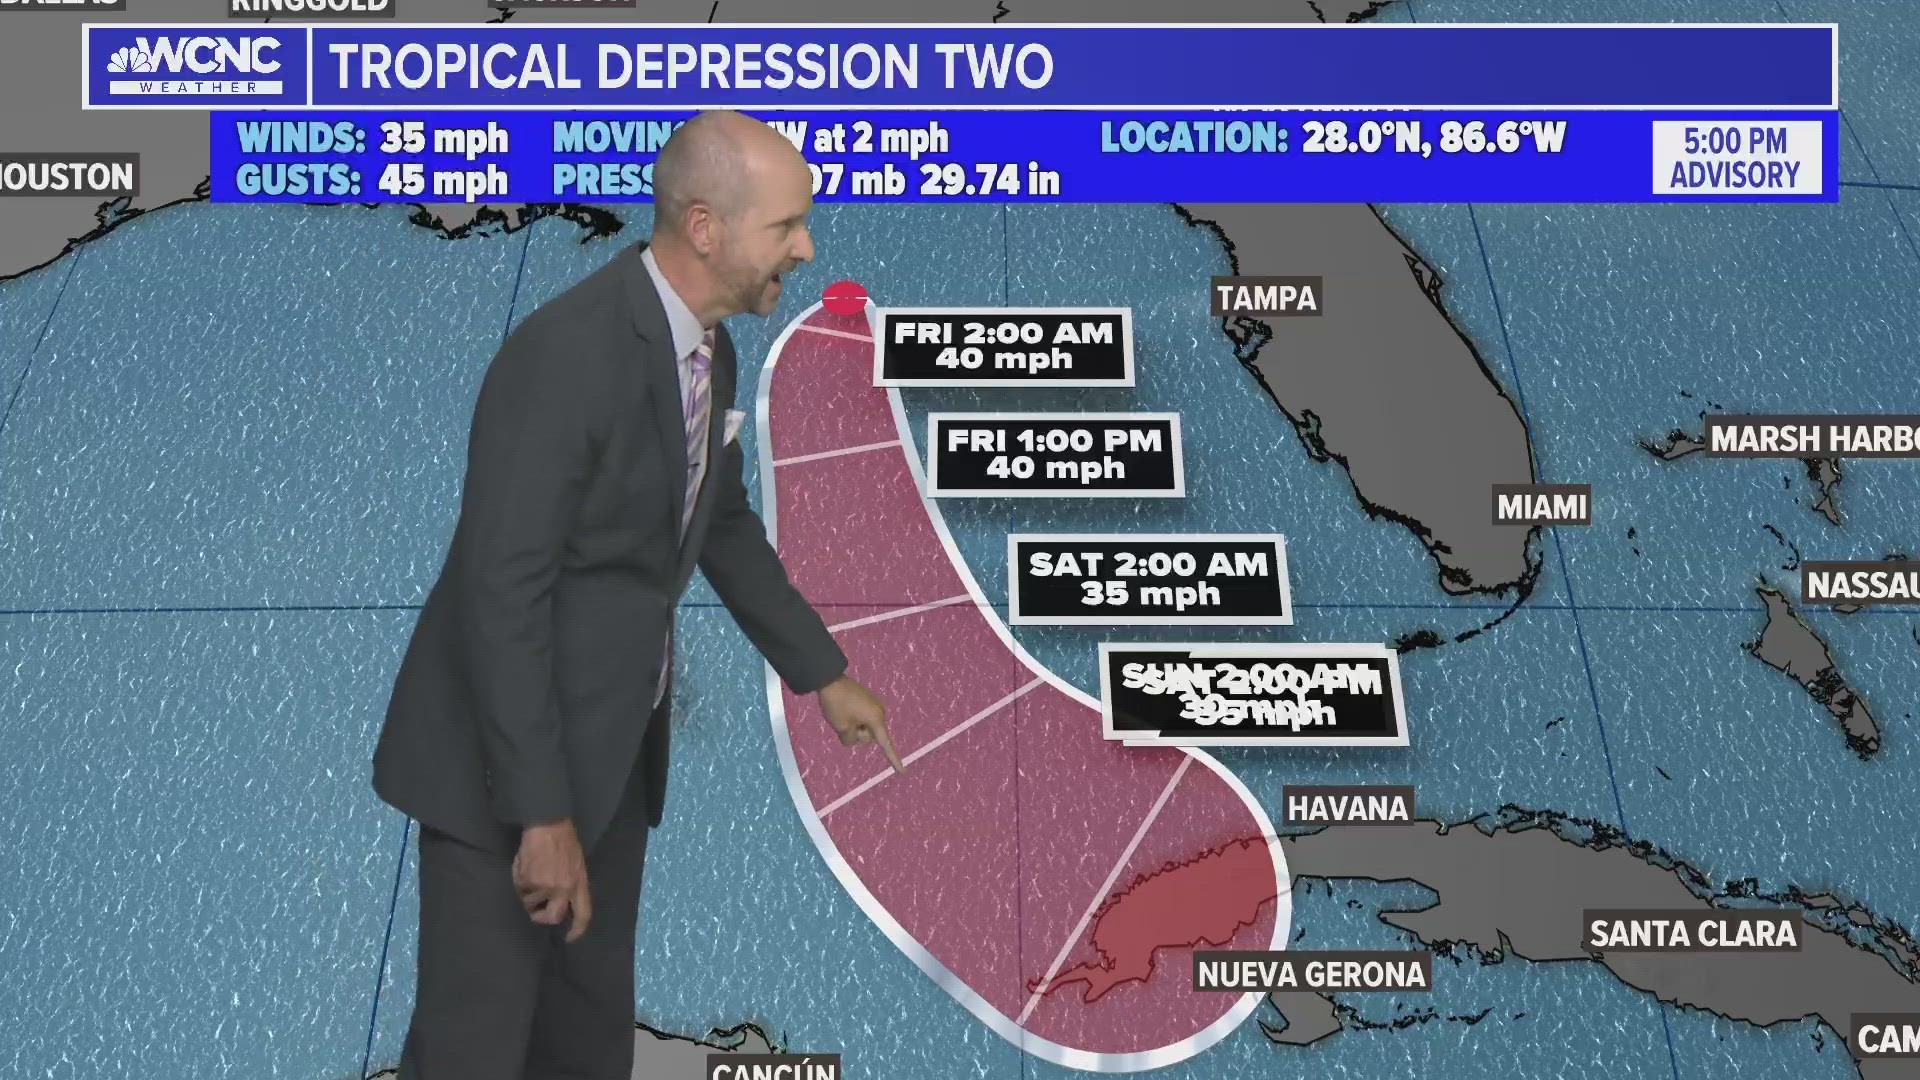 Tropical Depression Two developed Thursday afternoon in the northwestern Gulf of Mexico just off Florida's coast